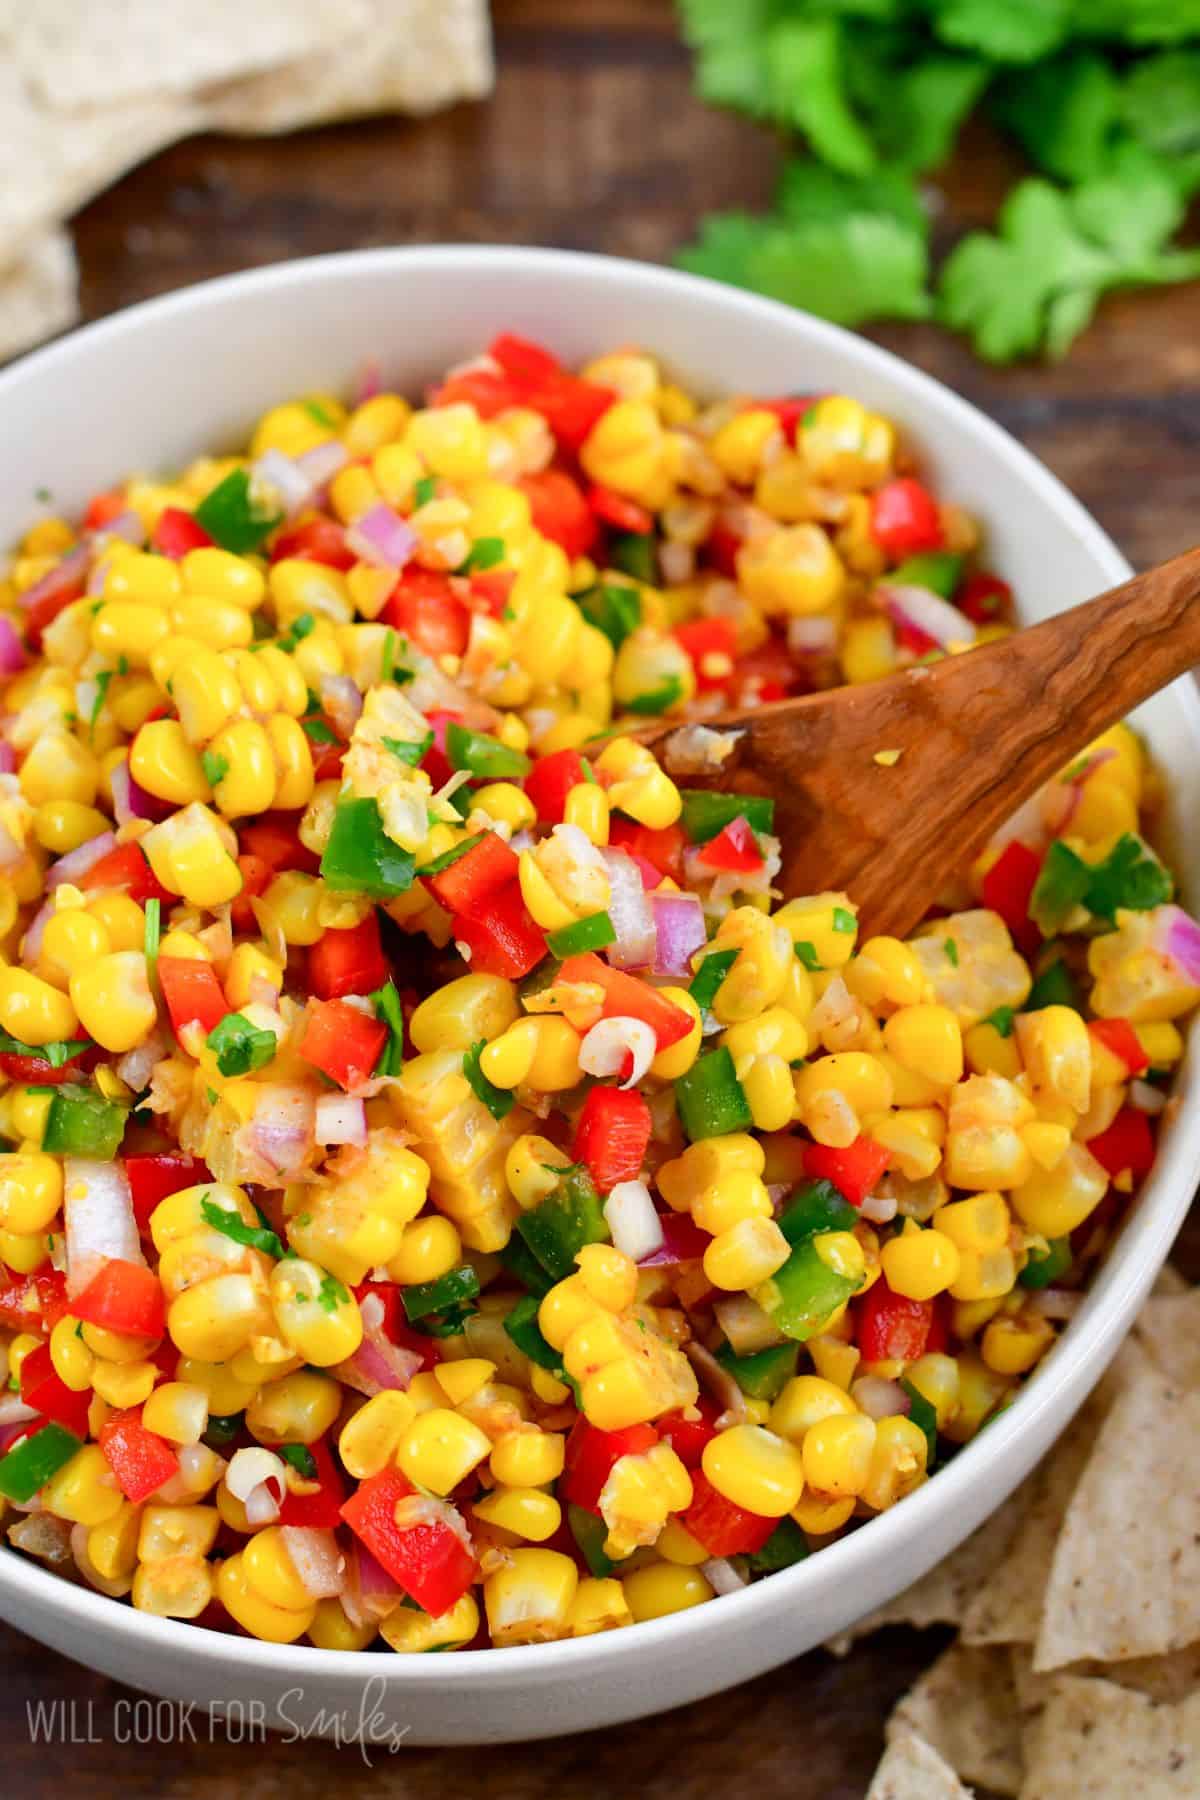 Scooping corn salsa up with a wooden spoon out of a white bowl.